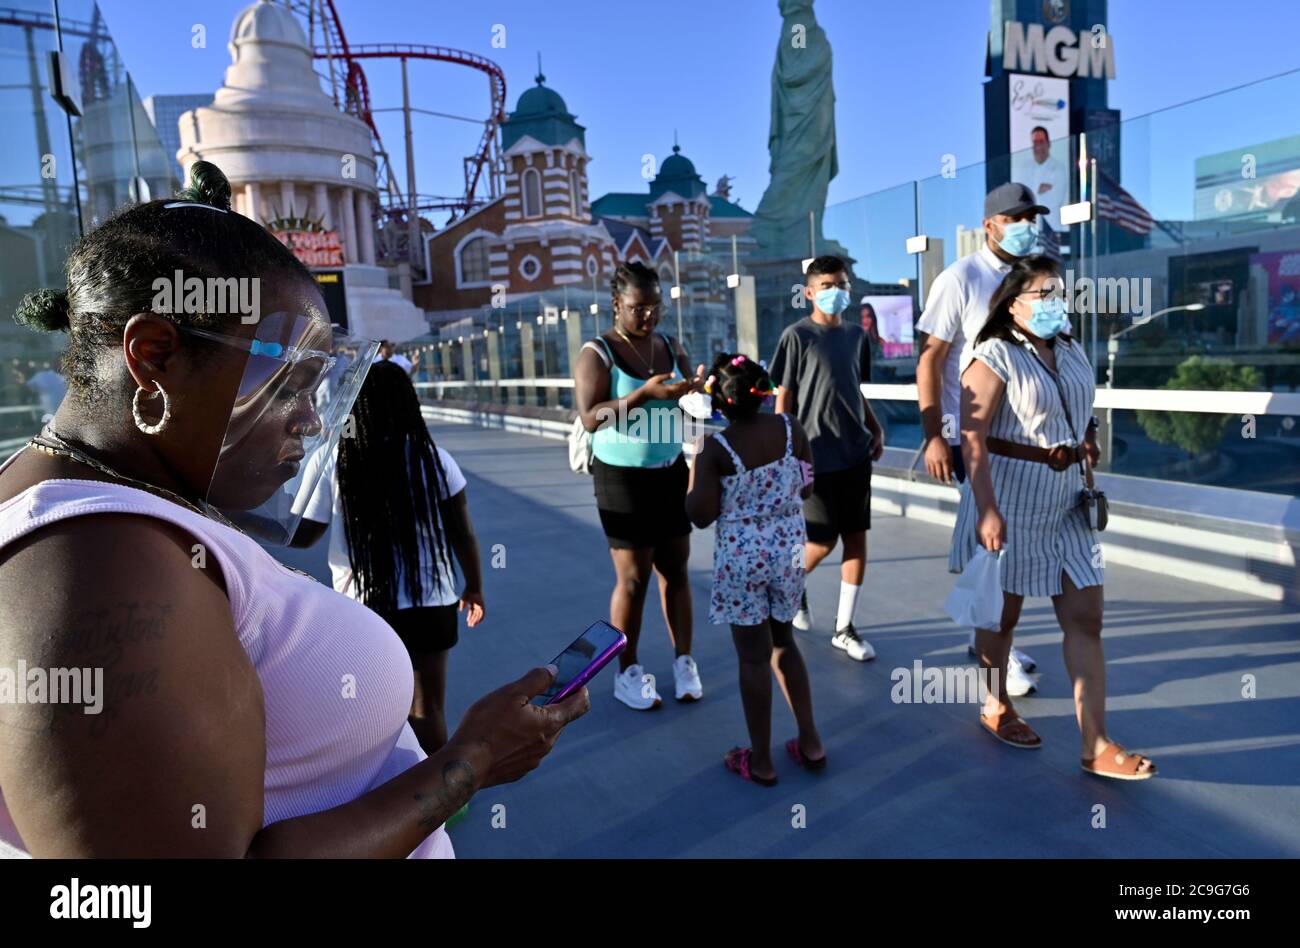 Las Vegas, Nevada, USA. 30th July, 2020. People wear face coverings as they stroll the Las Vegas Strip on July 30, 2020 in Las Vegas, Nevada. The state has a mandatory face covering policy in effect for anyone in any public space. Credit: David Becker/ZUMA Wire/Alamy Live News Stock Photo